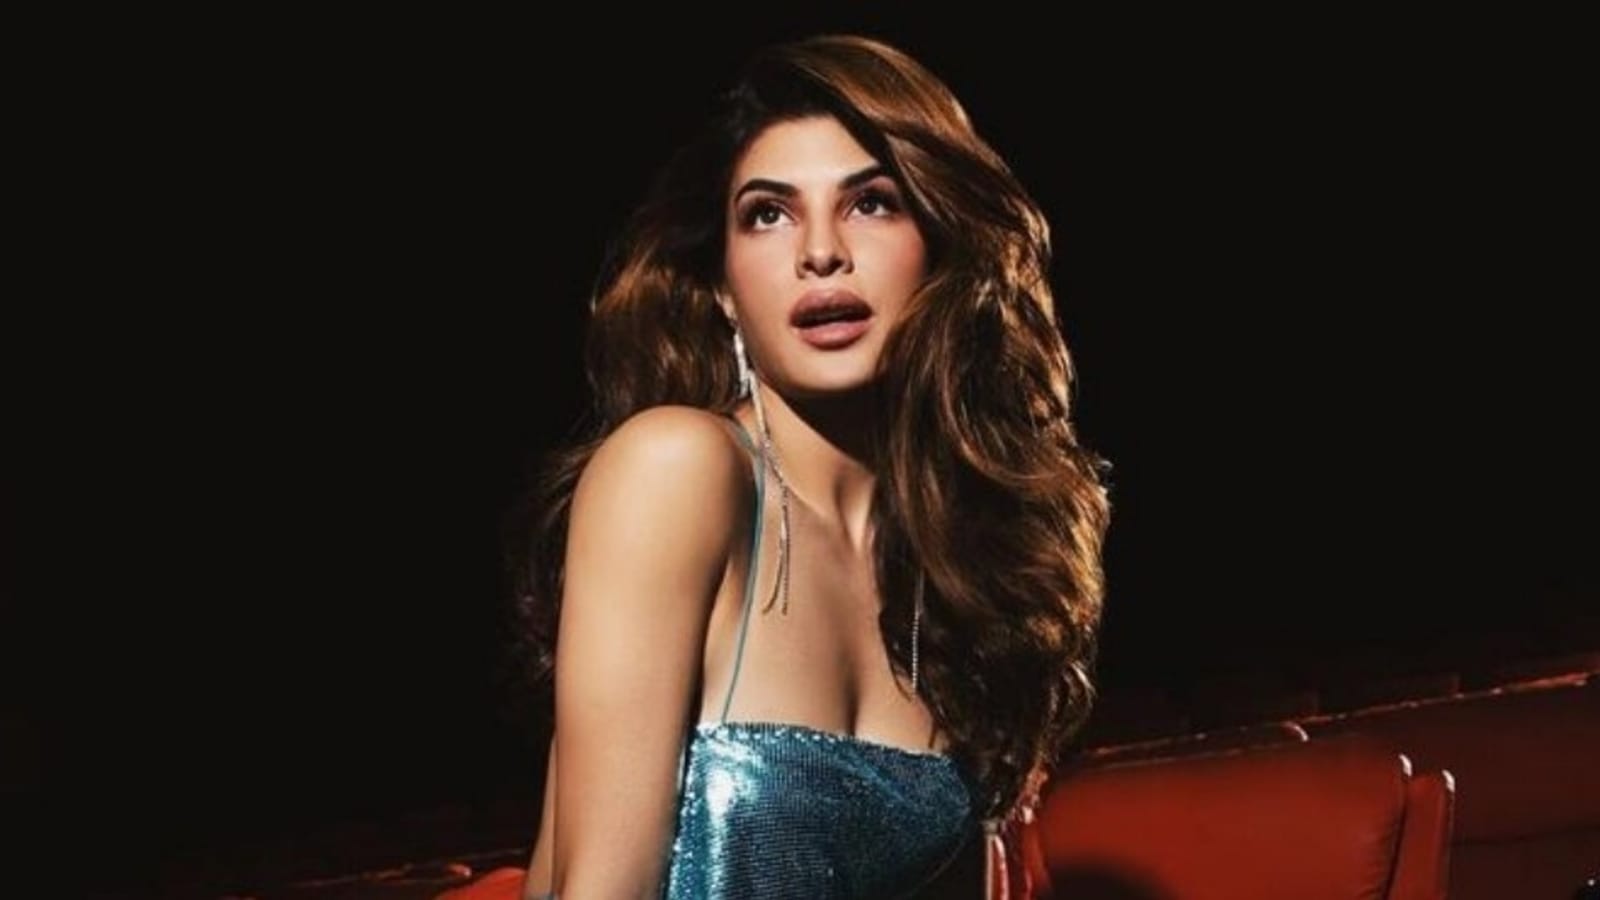 Jacqueline Fernandez turns up the heat in backless sequin top and mini skirt for new pics: Check it out here